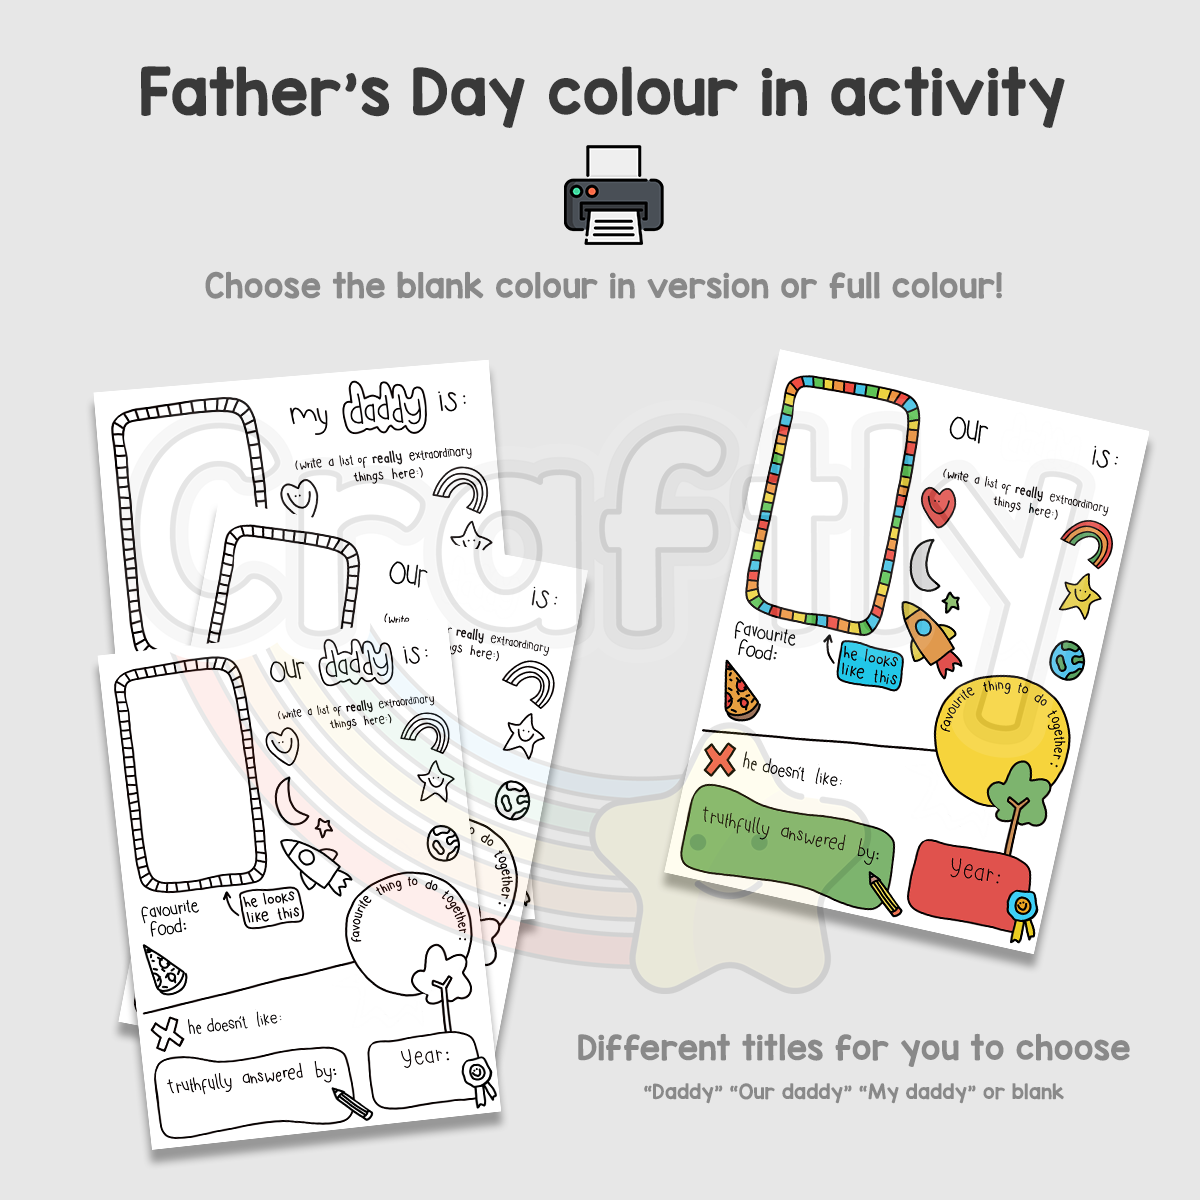 Father's Day Activity (My daddy is..)